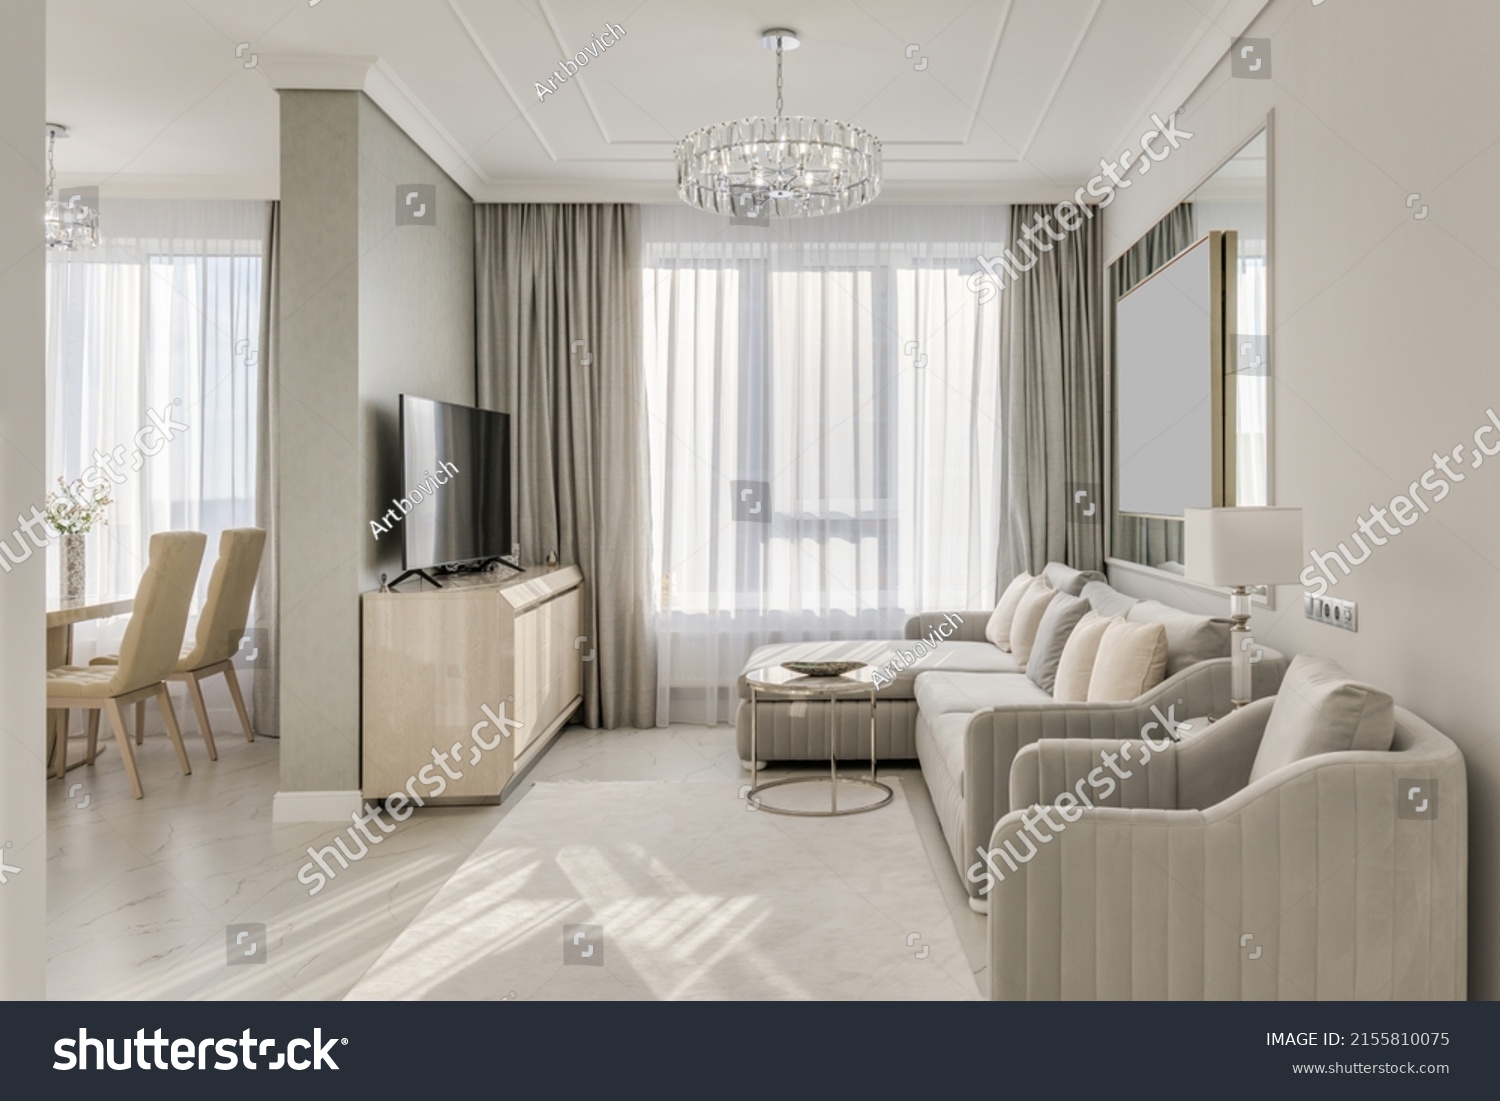 Classic interior design large bright room in neutral colors with furniture and chandelier #2155810075